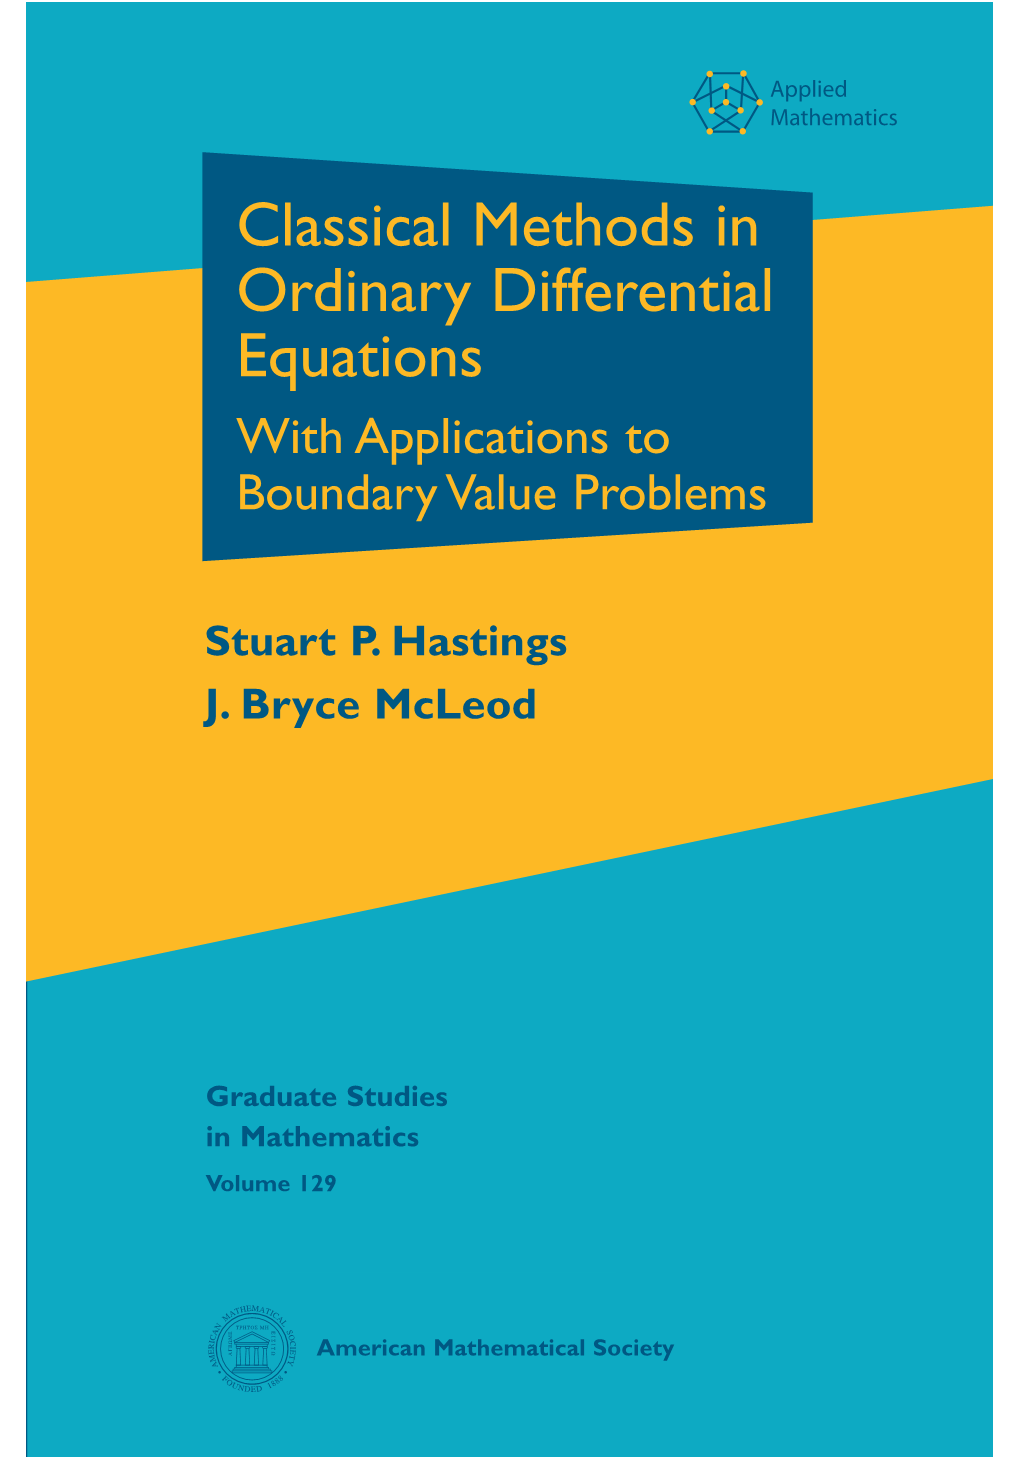 Classical Methods in Ordinary Differential Equations with Applications to Boundary Value Problems